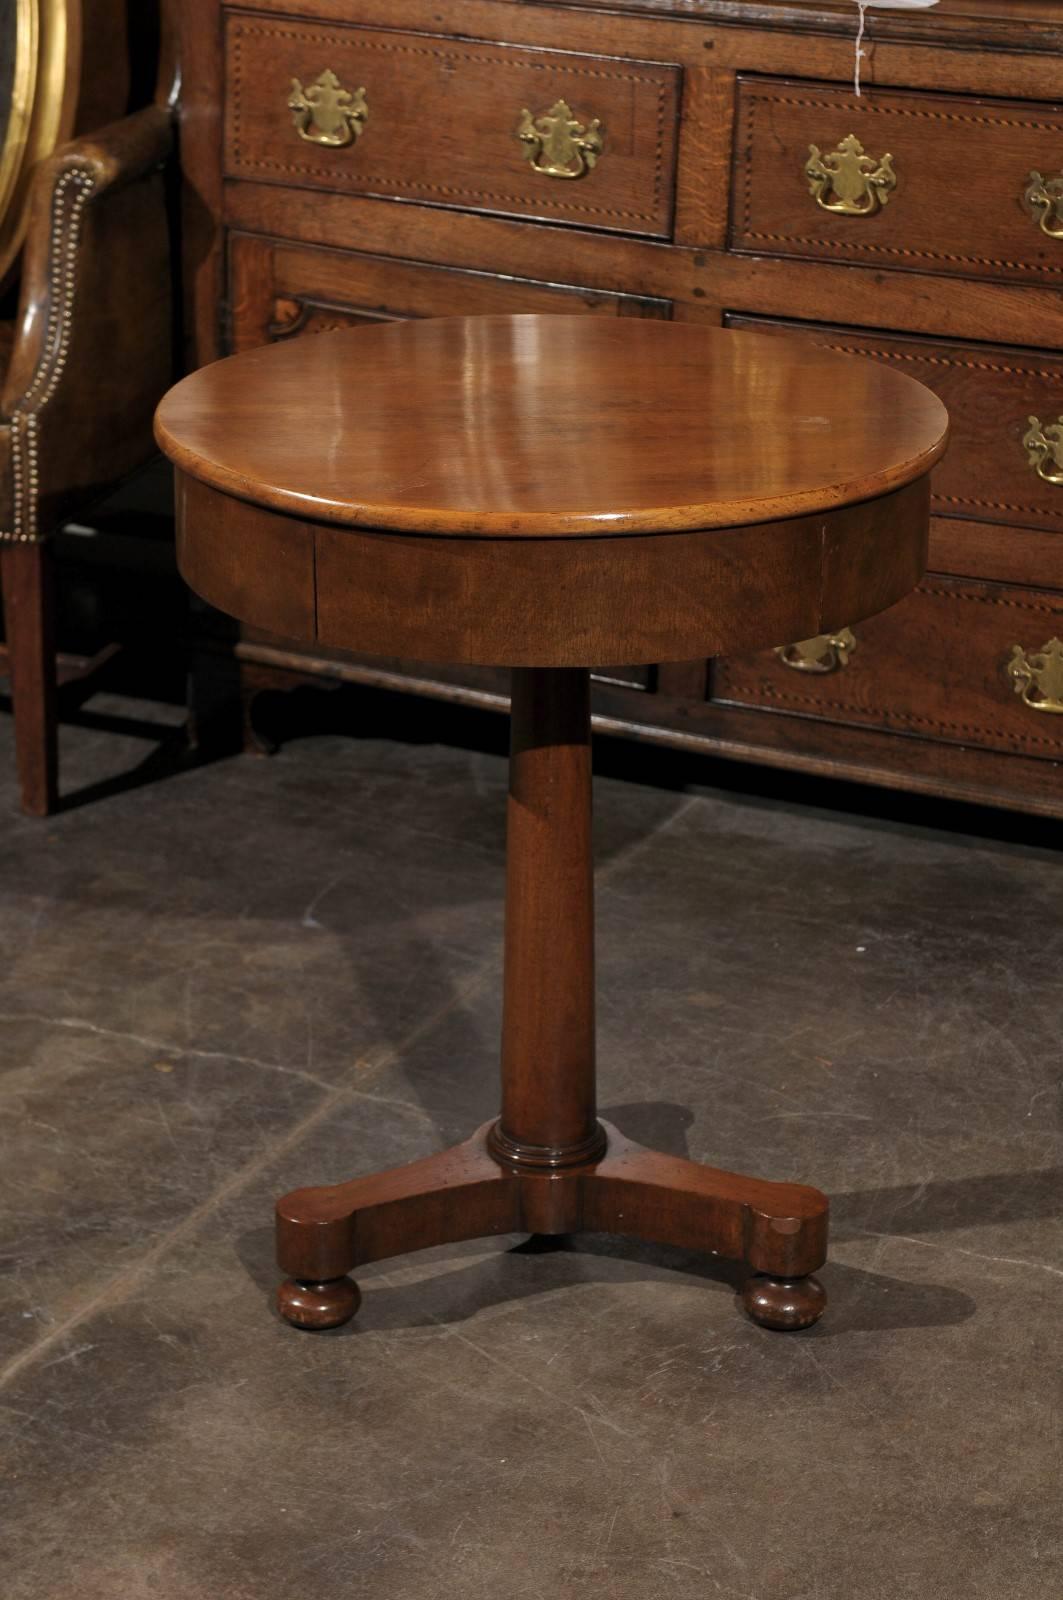 Round pedestal table with one drawer.